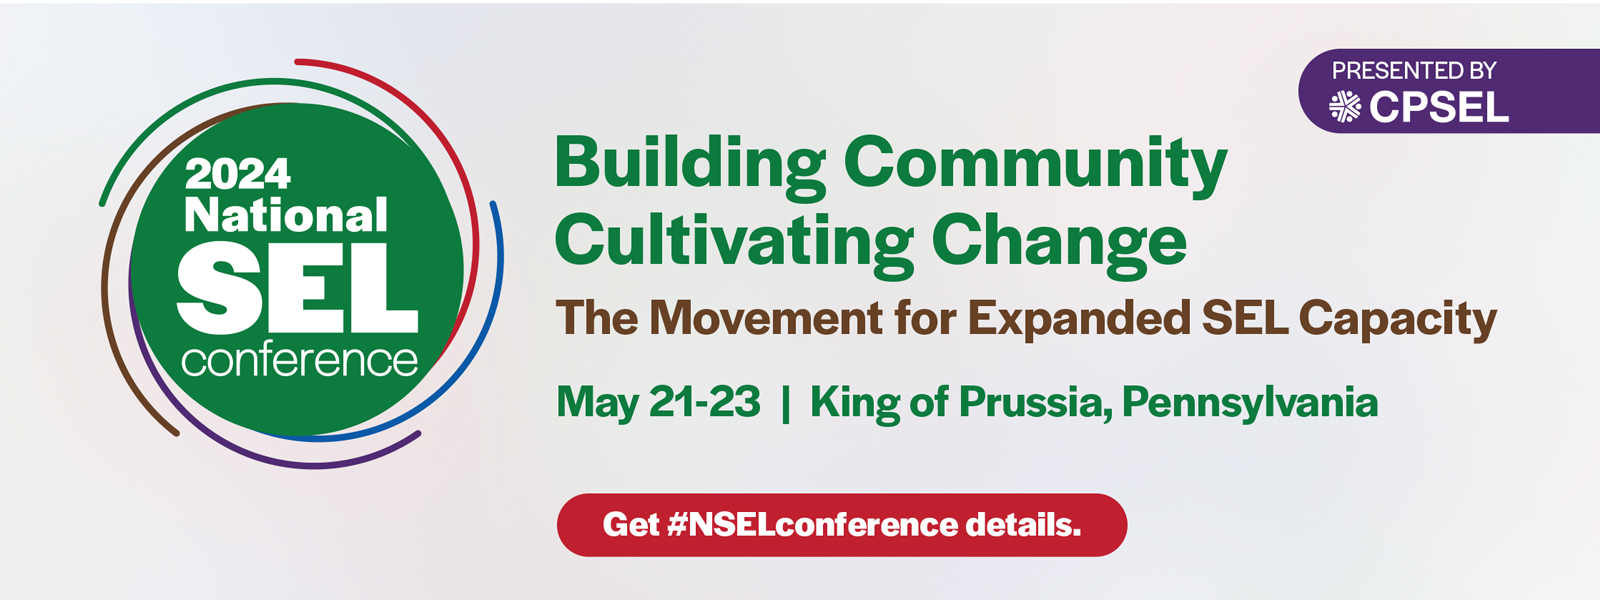 2024 National Social and Emotional Learning Conference. Building community. Cultivating Change. The movement for expanded SEL capacity. Held May 21 through 23 in King of Prussia, Pennsylvania. Click to visit conference website.